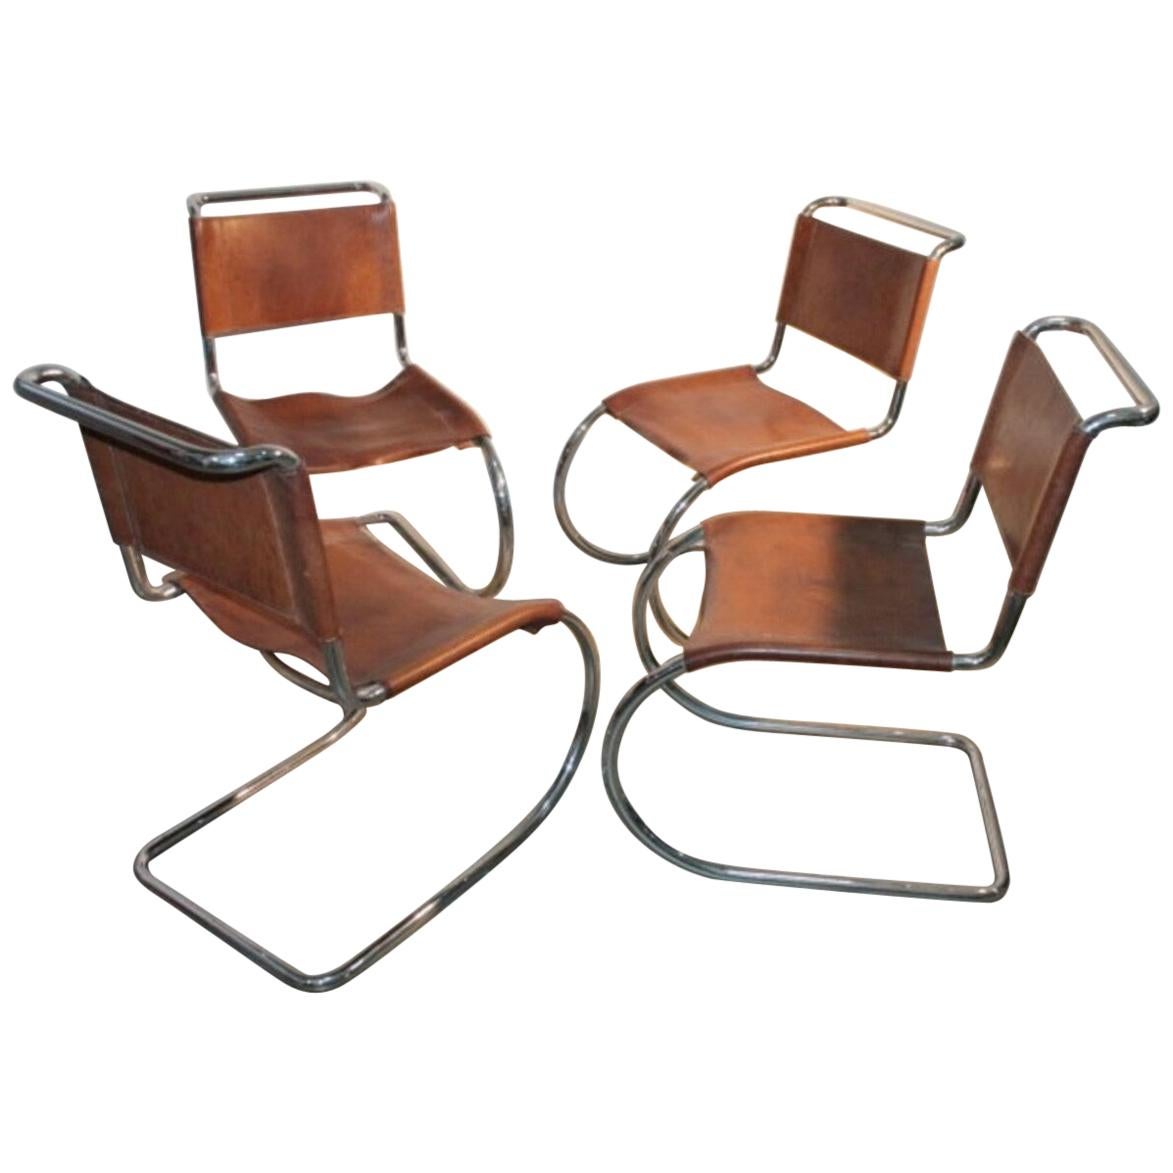 Mies van der Rohe Vintage Cantilever Chairs, 1970s